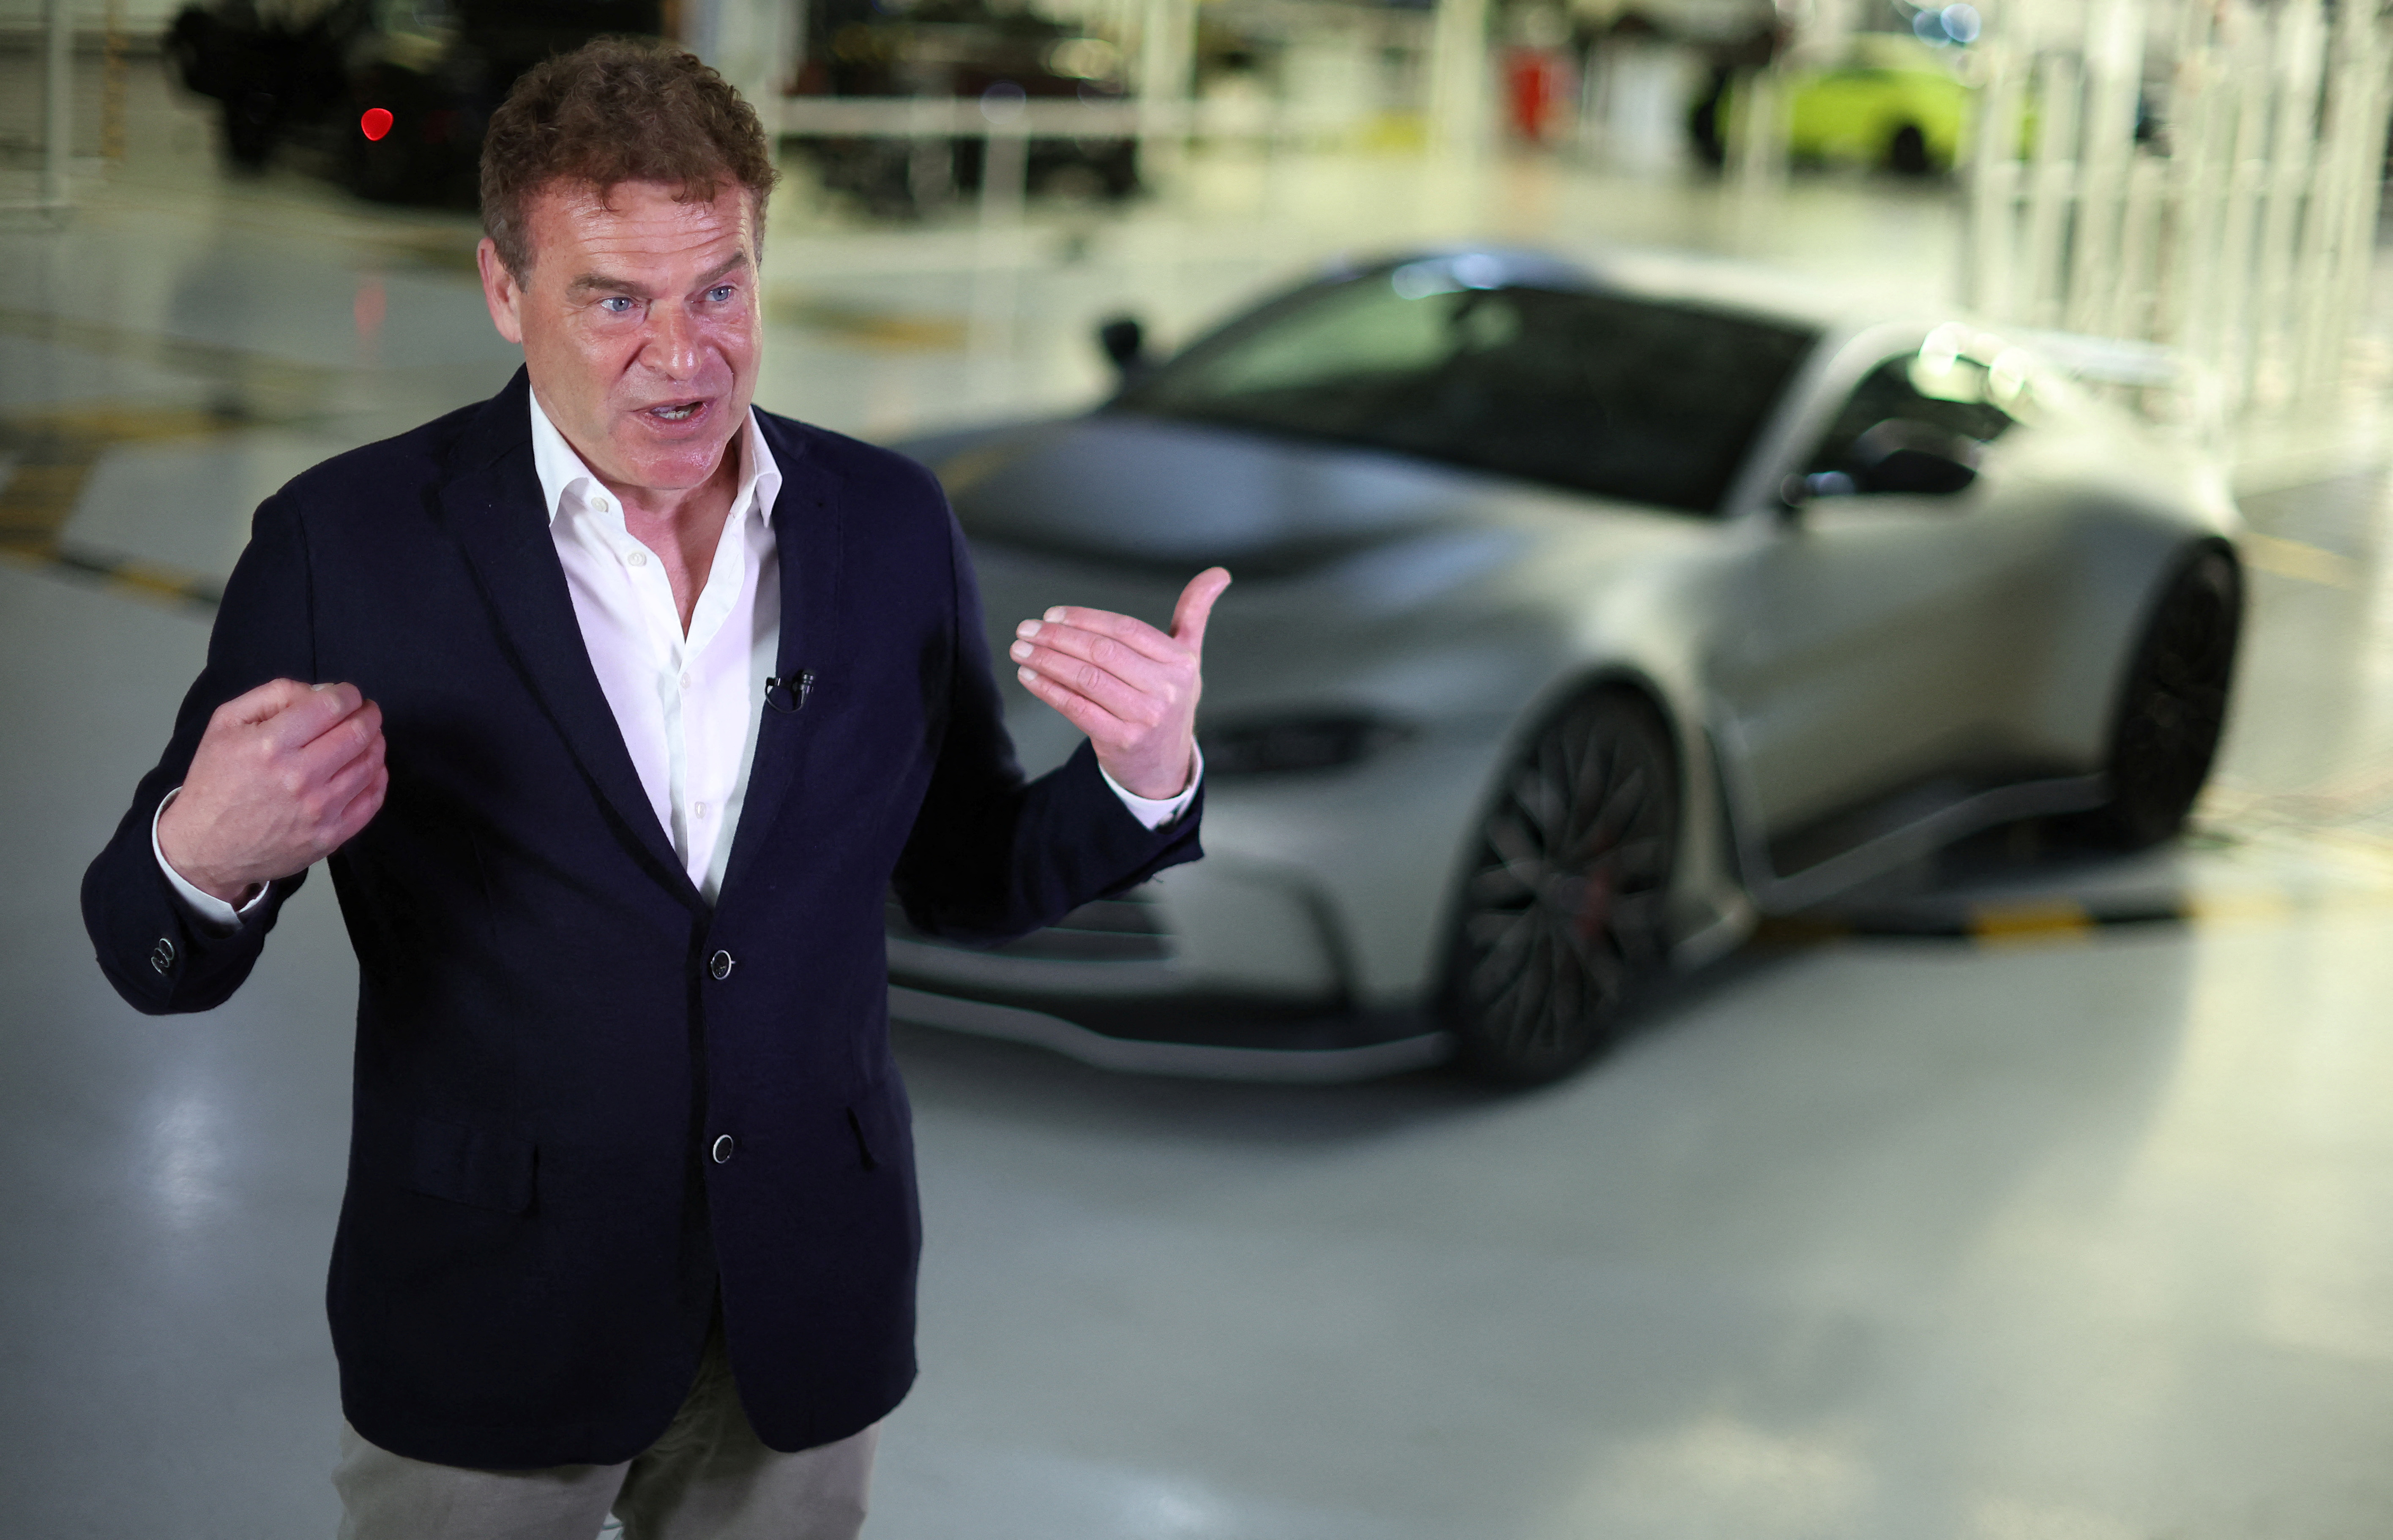 Aston Martin CEO Tobias Moers talks during a television interview in front of the new V12 Vantage car at the company’s factory in Gaydon